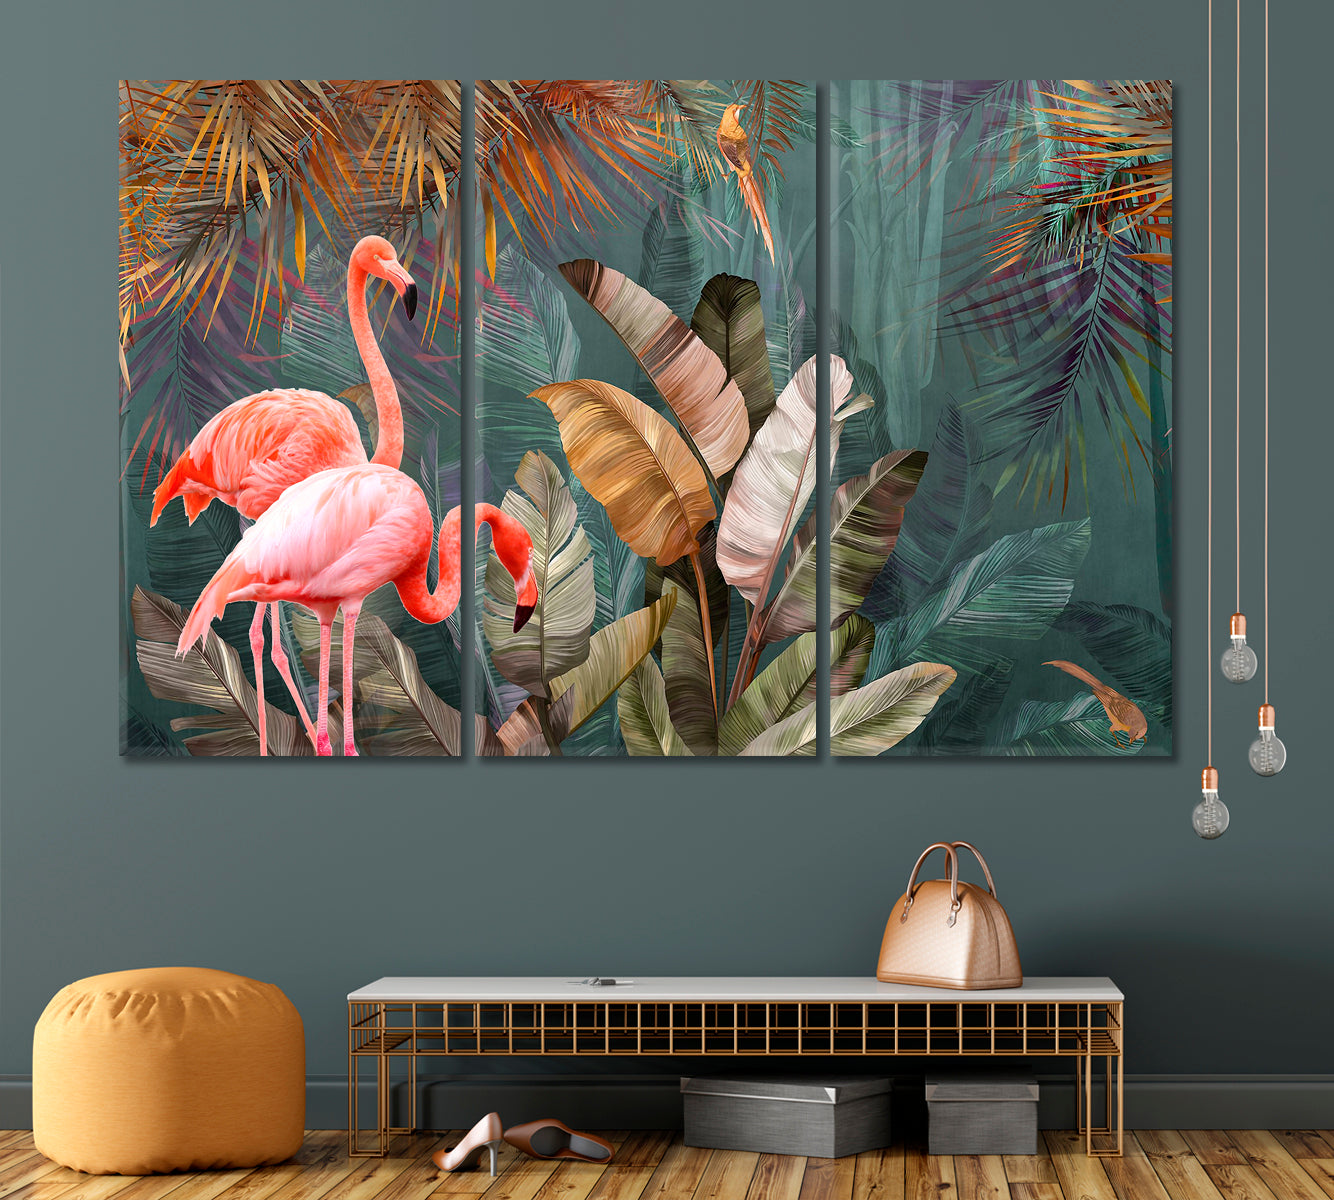 Flamingo And Tropical Jungle Rainforest Pattern Poster Tropical, Exotic Art Print Artesty 3 panels 36" x 24" 